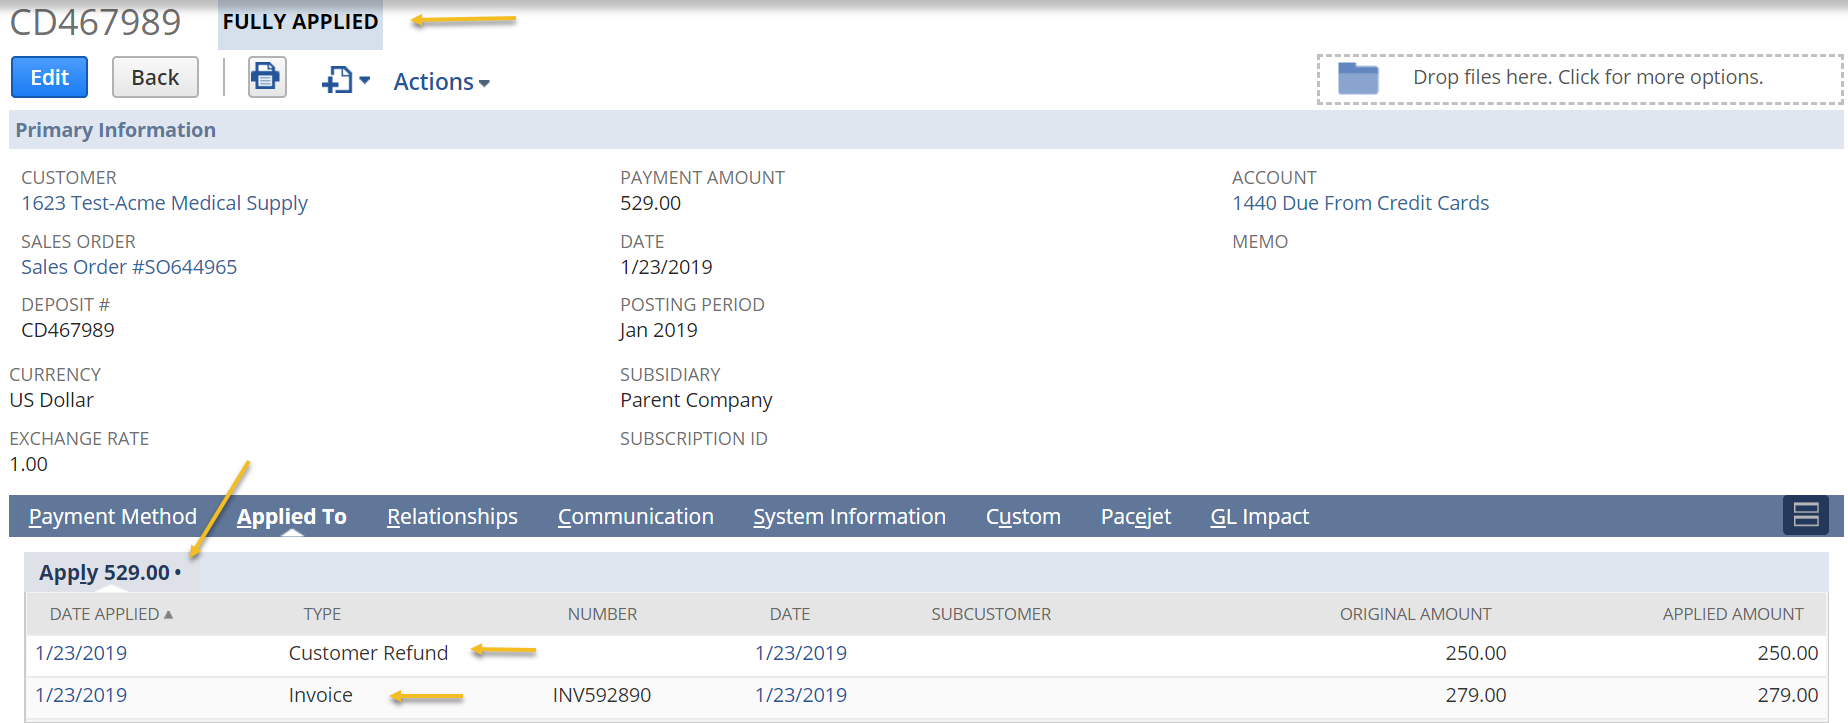 Invoice and customer refund applied to customer deposit